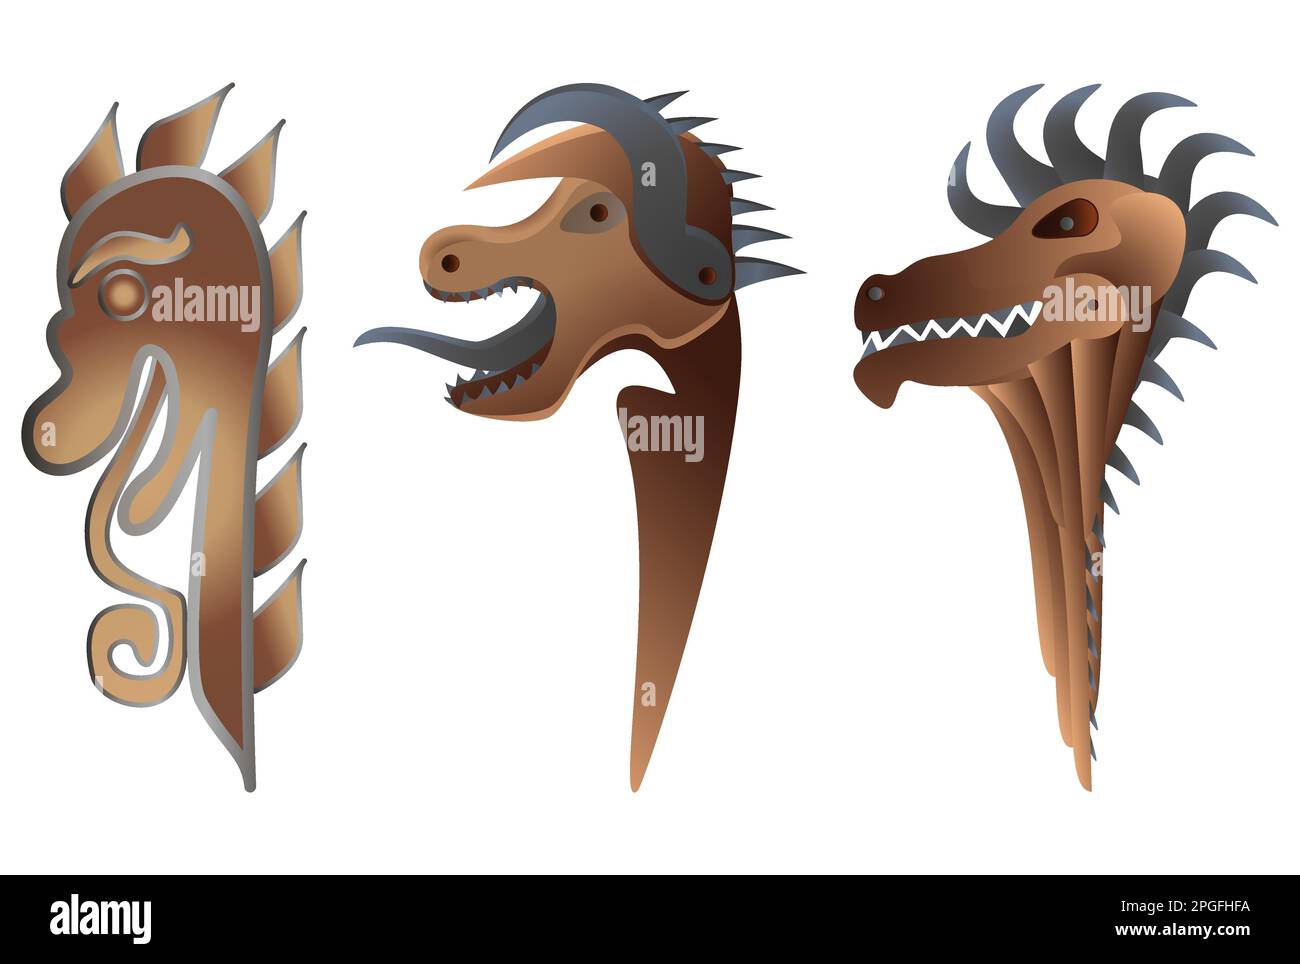 Dragon Head Set in realistic style. Wooden sculpture. Viking drakkar. Norway long boat. Colorful vector illustration isolated on white background. Stock Vector